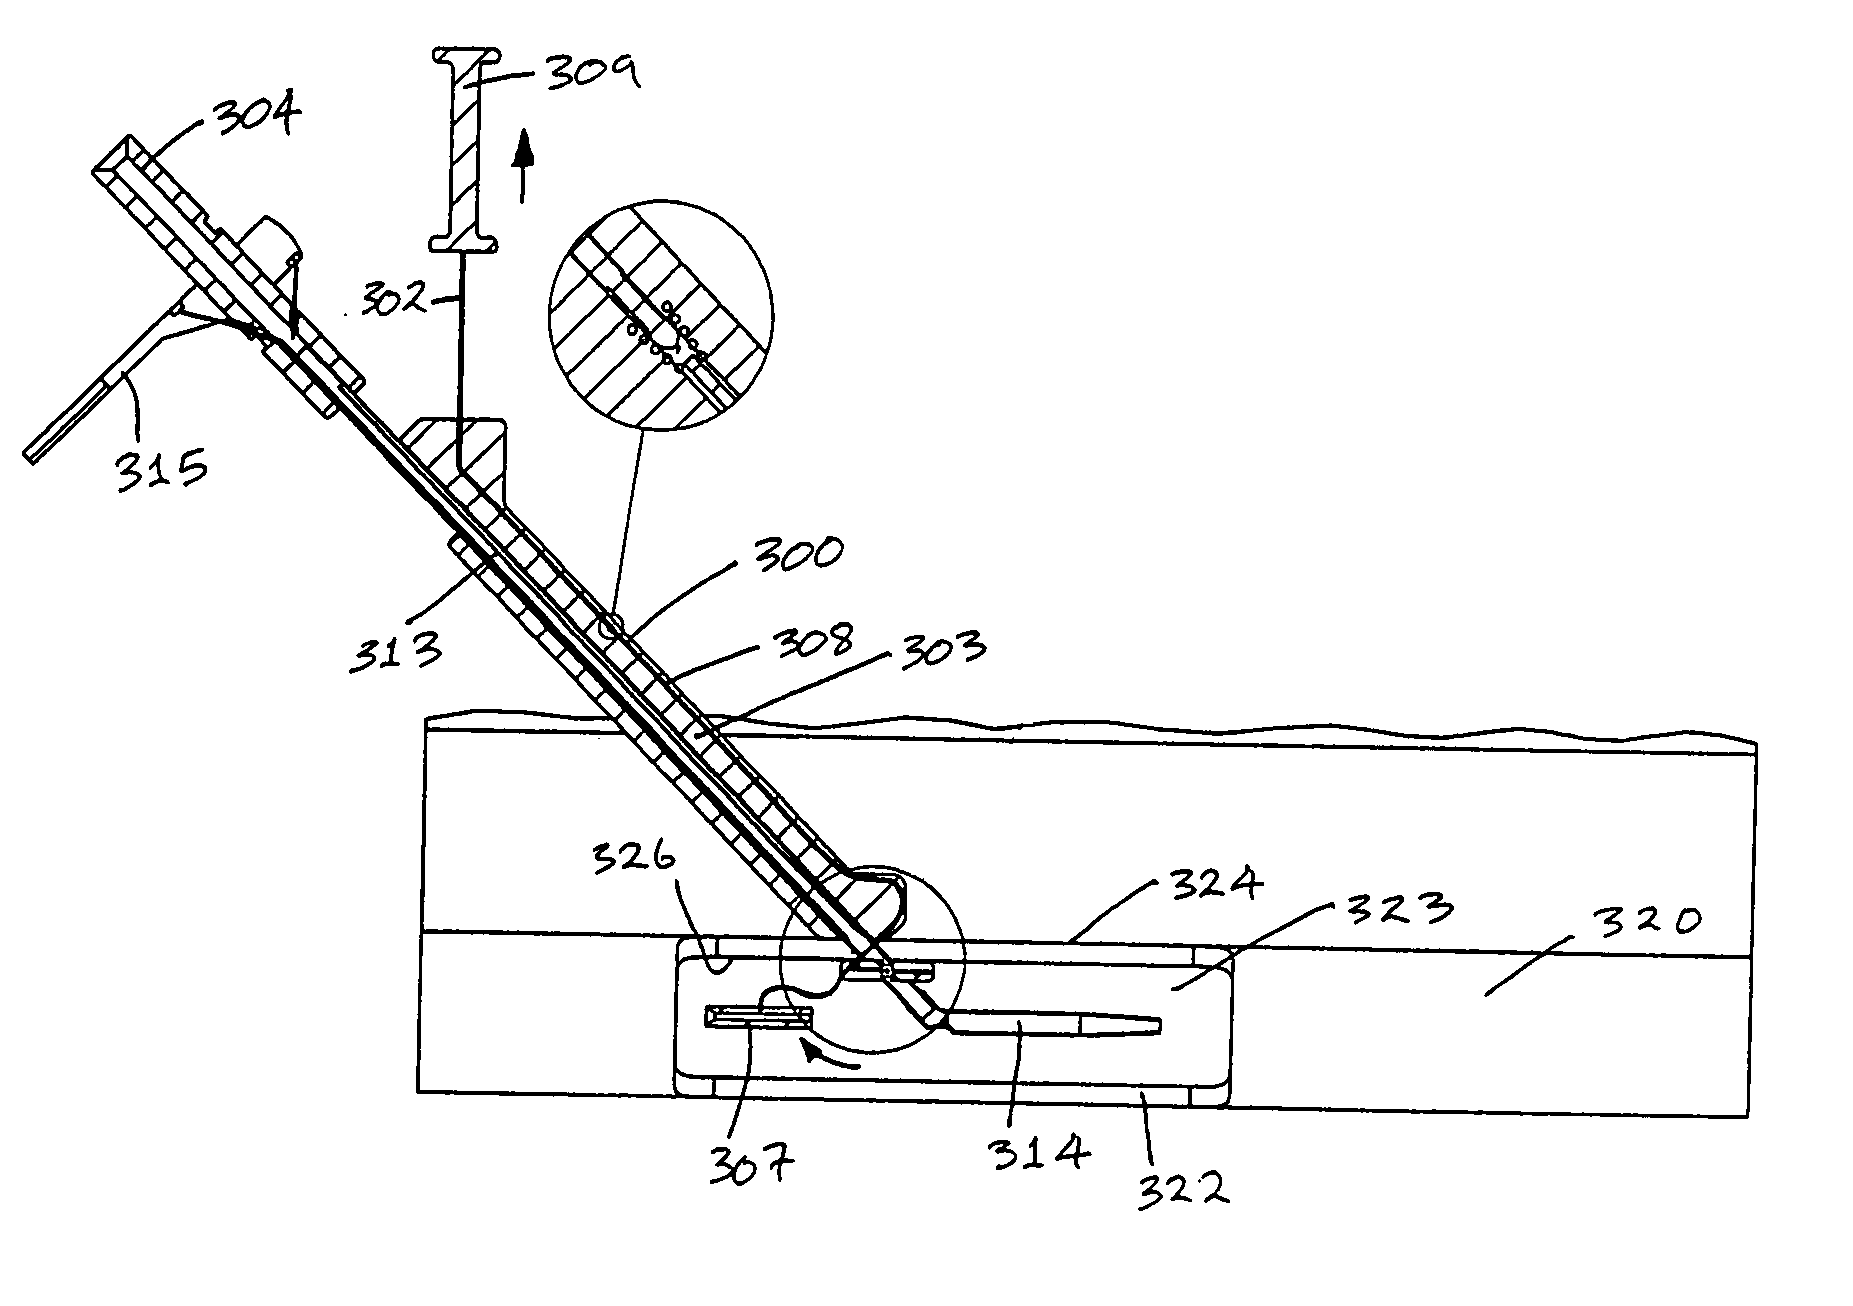 Interventional medical closure device